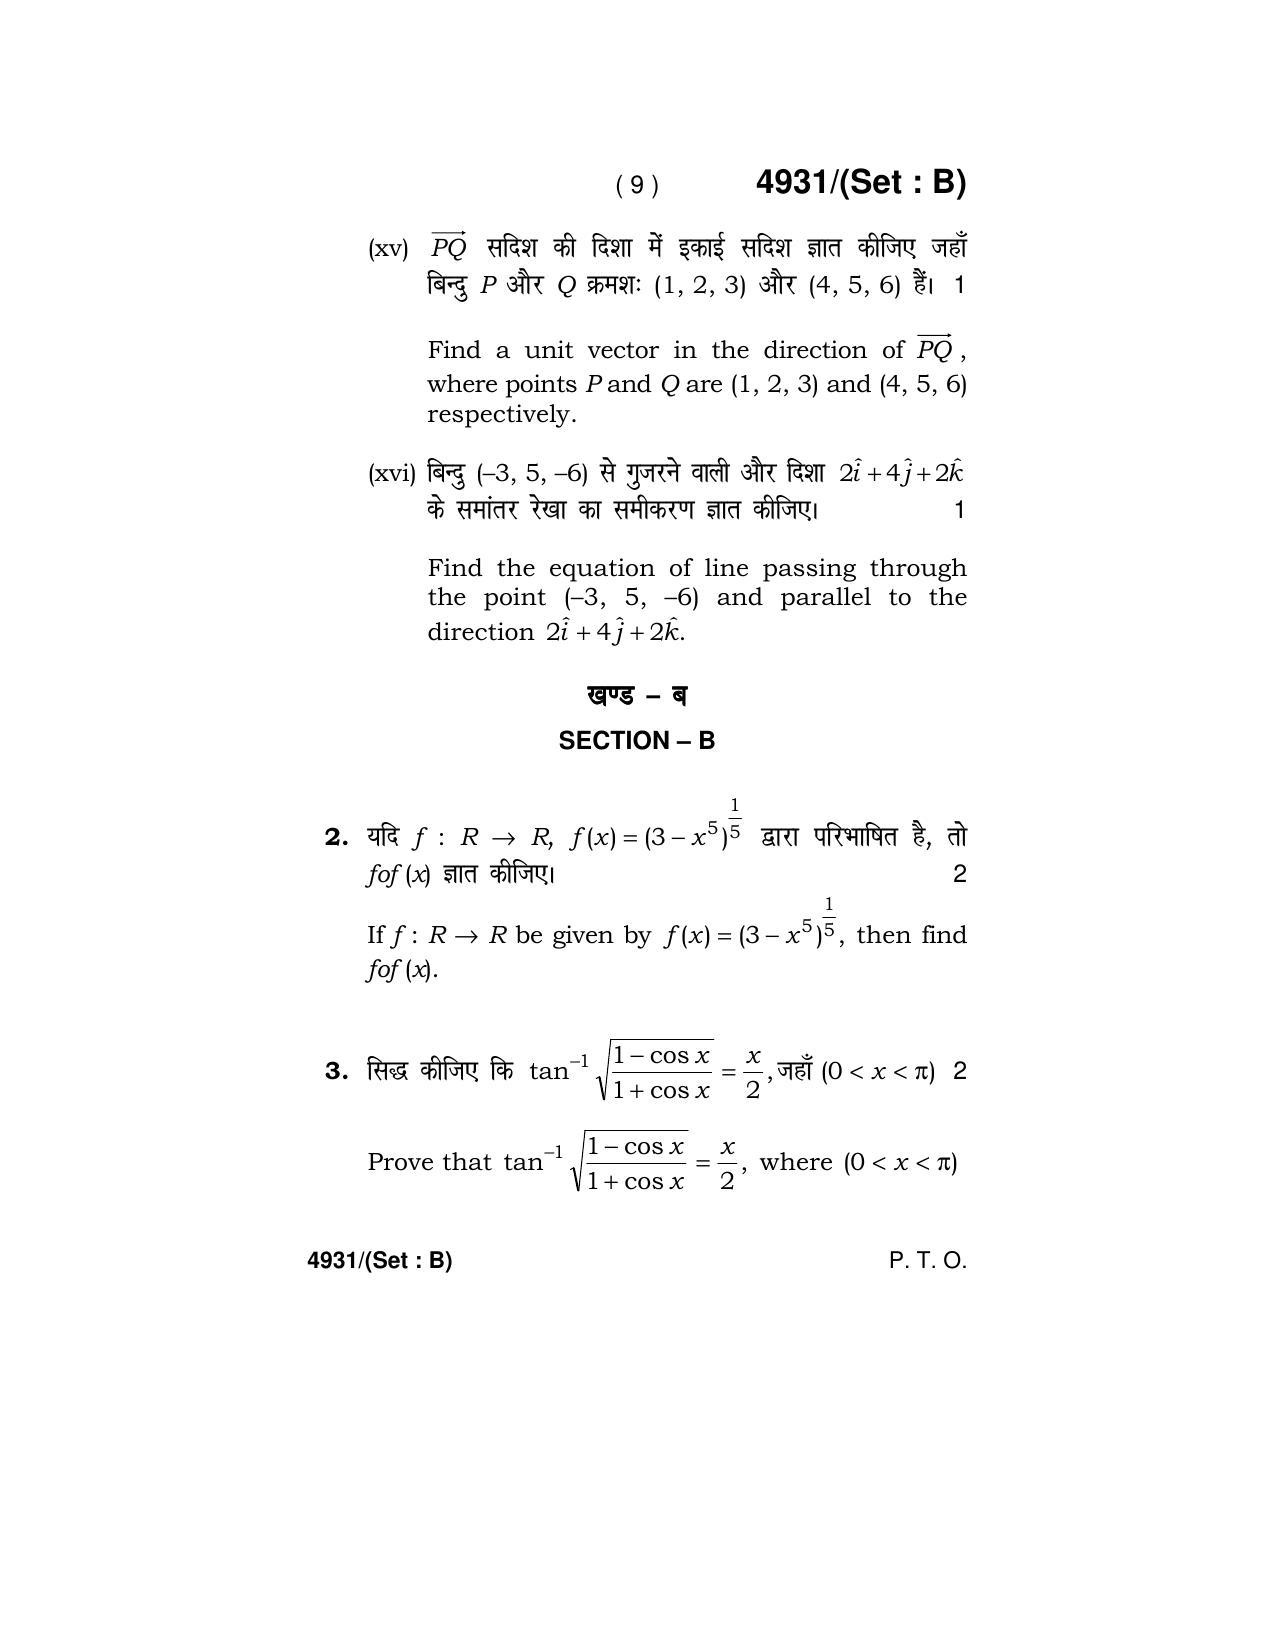 Haryana Board HBSE Class 12 Mathematics 2020 Question Paper - Page 25